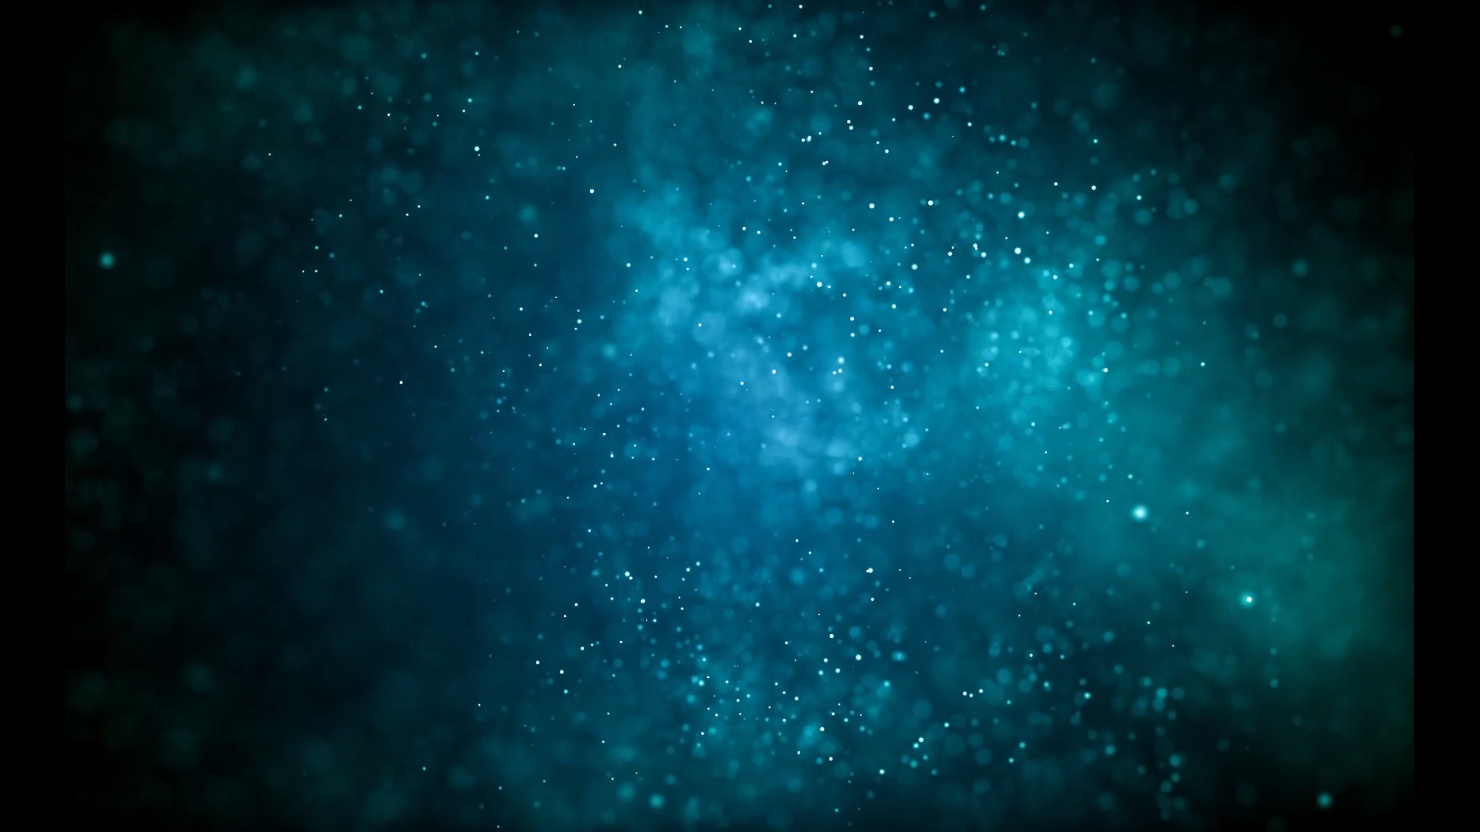 Space-Windows-10-Animated-Wallpaper by SmithJerry on DeviantArt